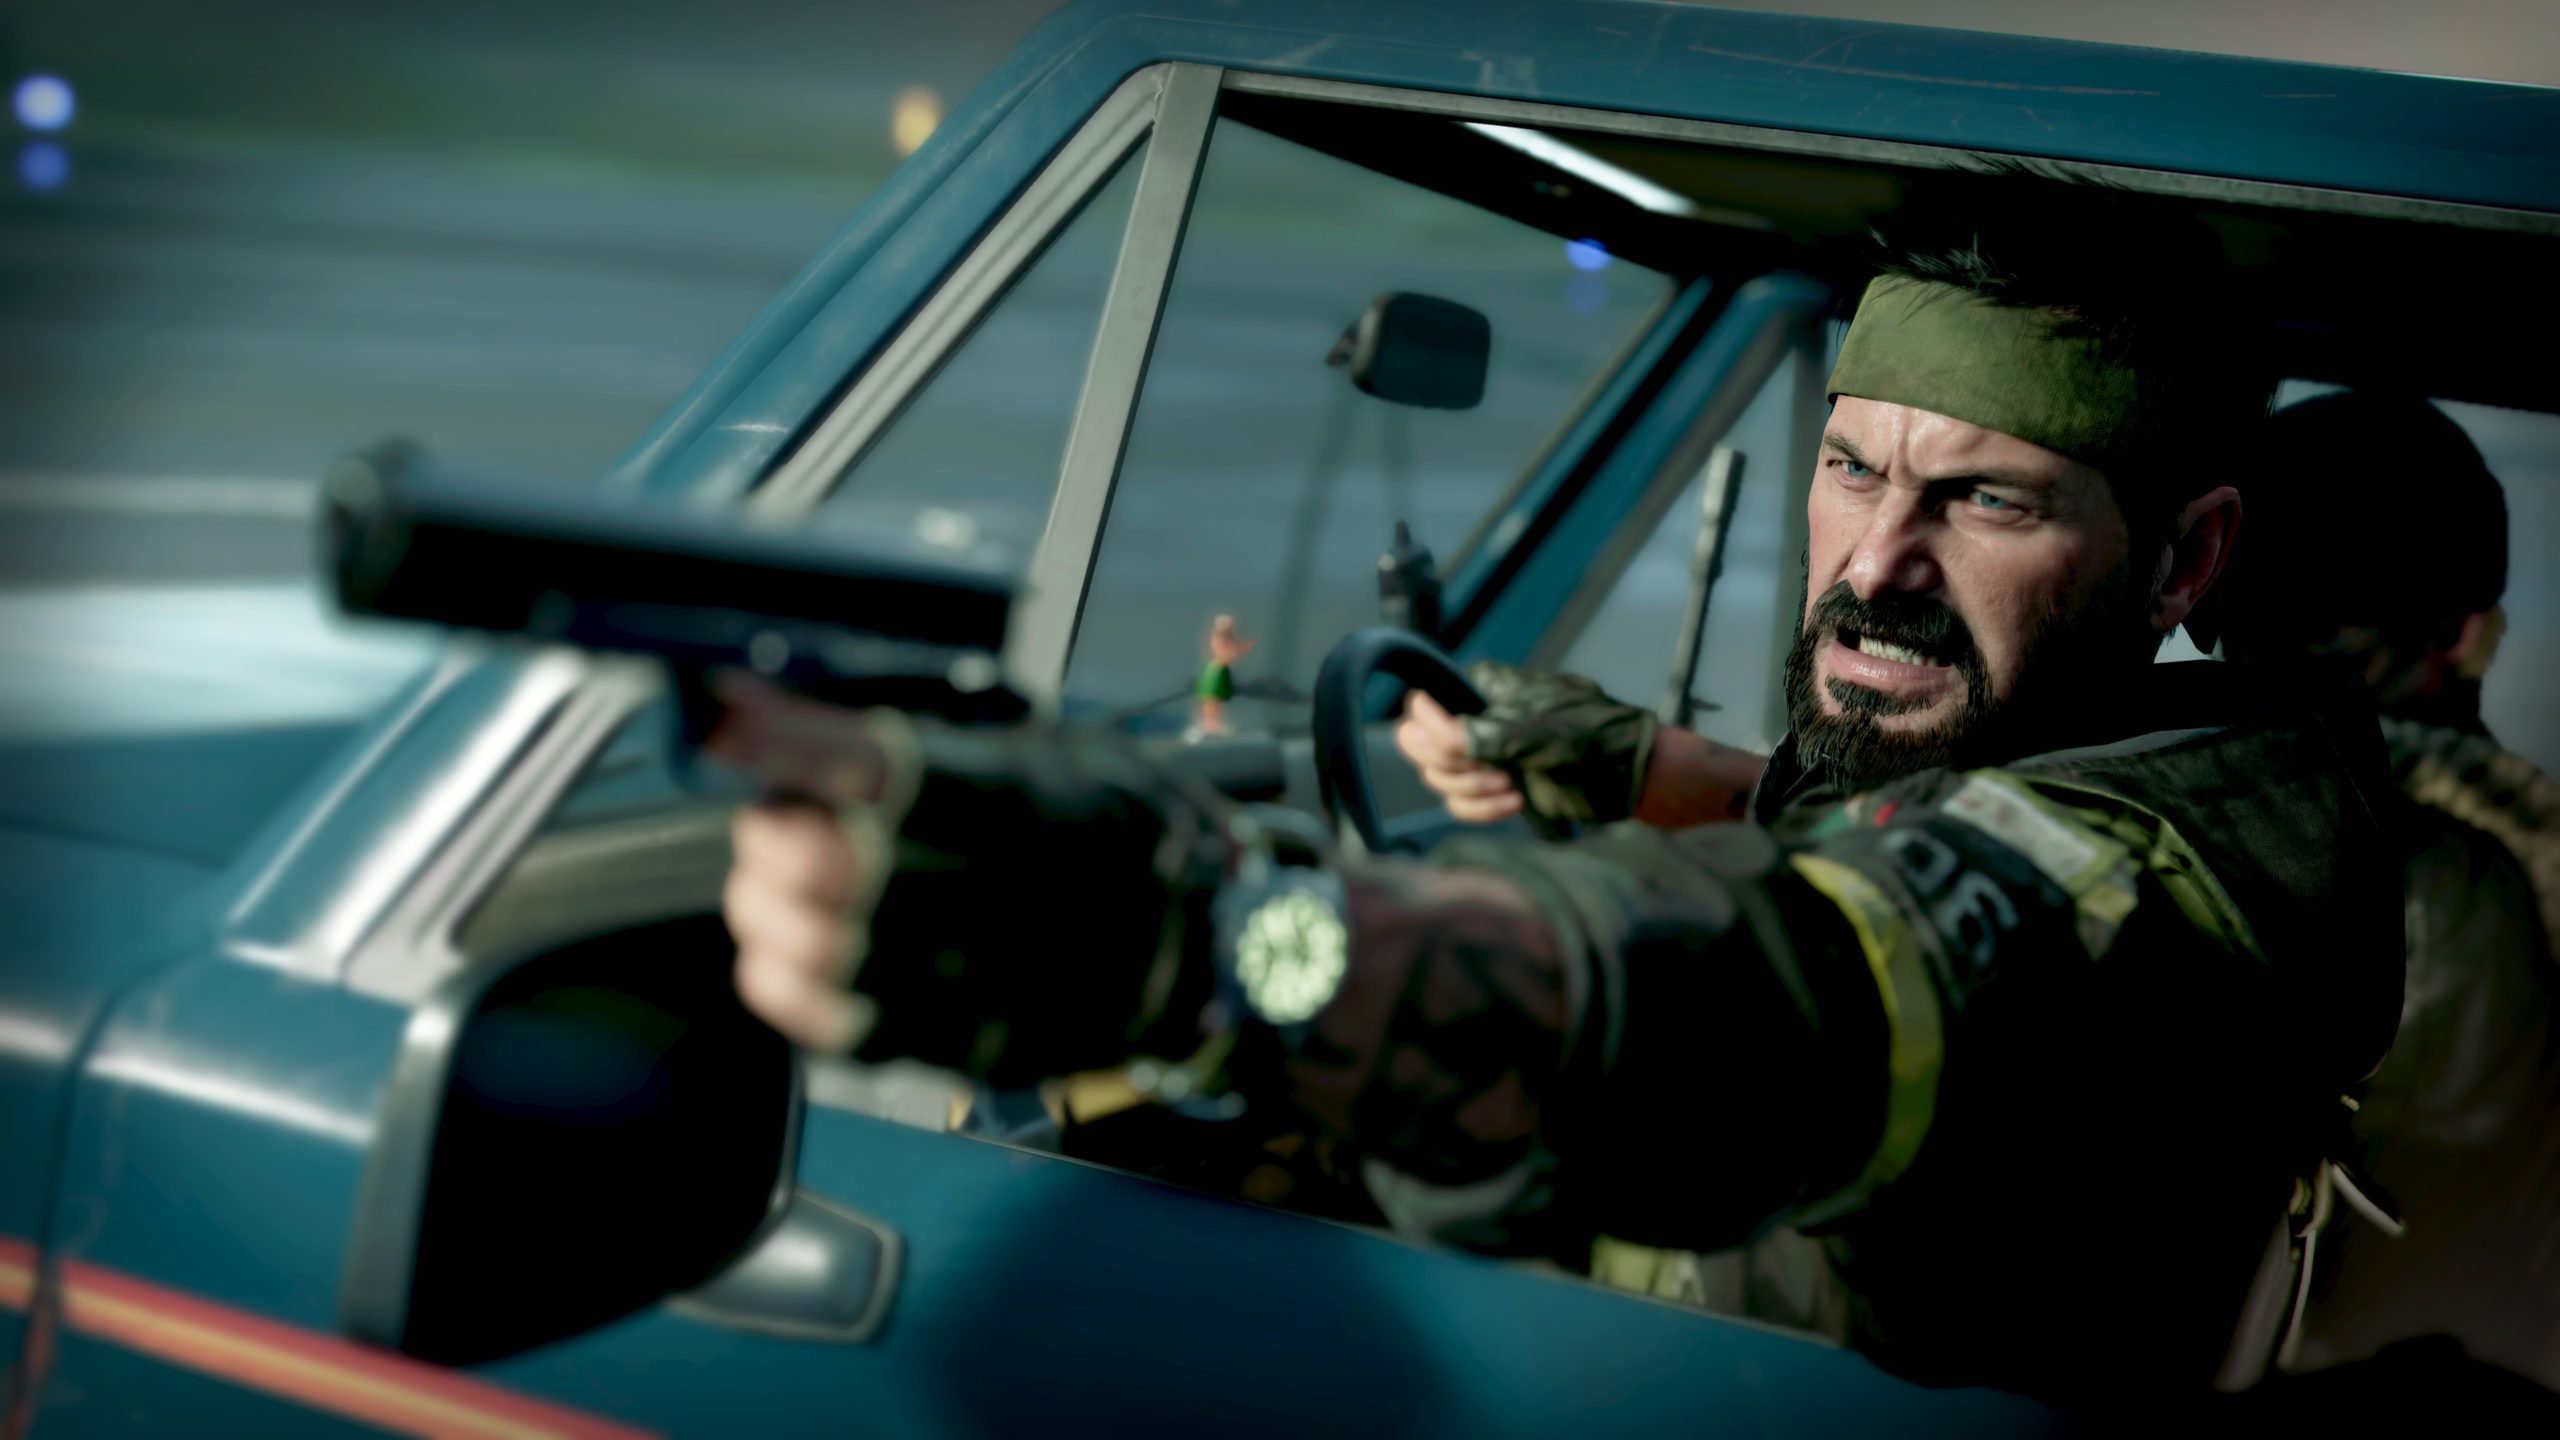 Call of Duty: Black Ops Cold War campaign picks up where the last game left off